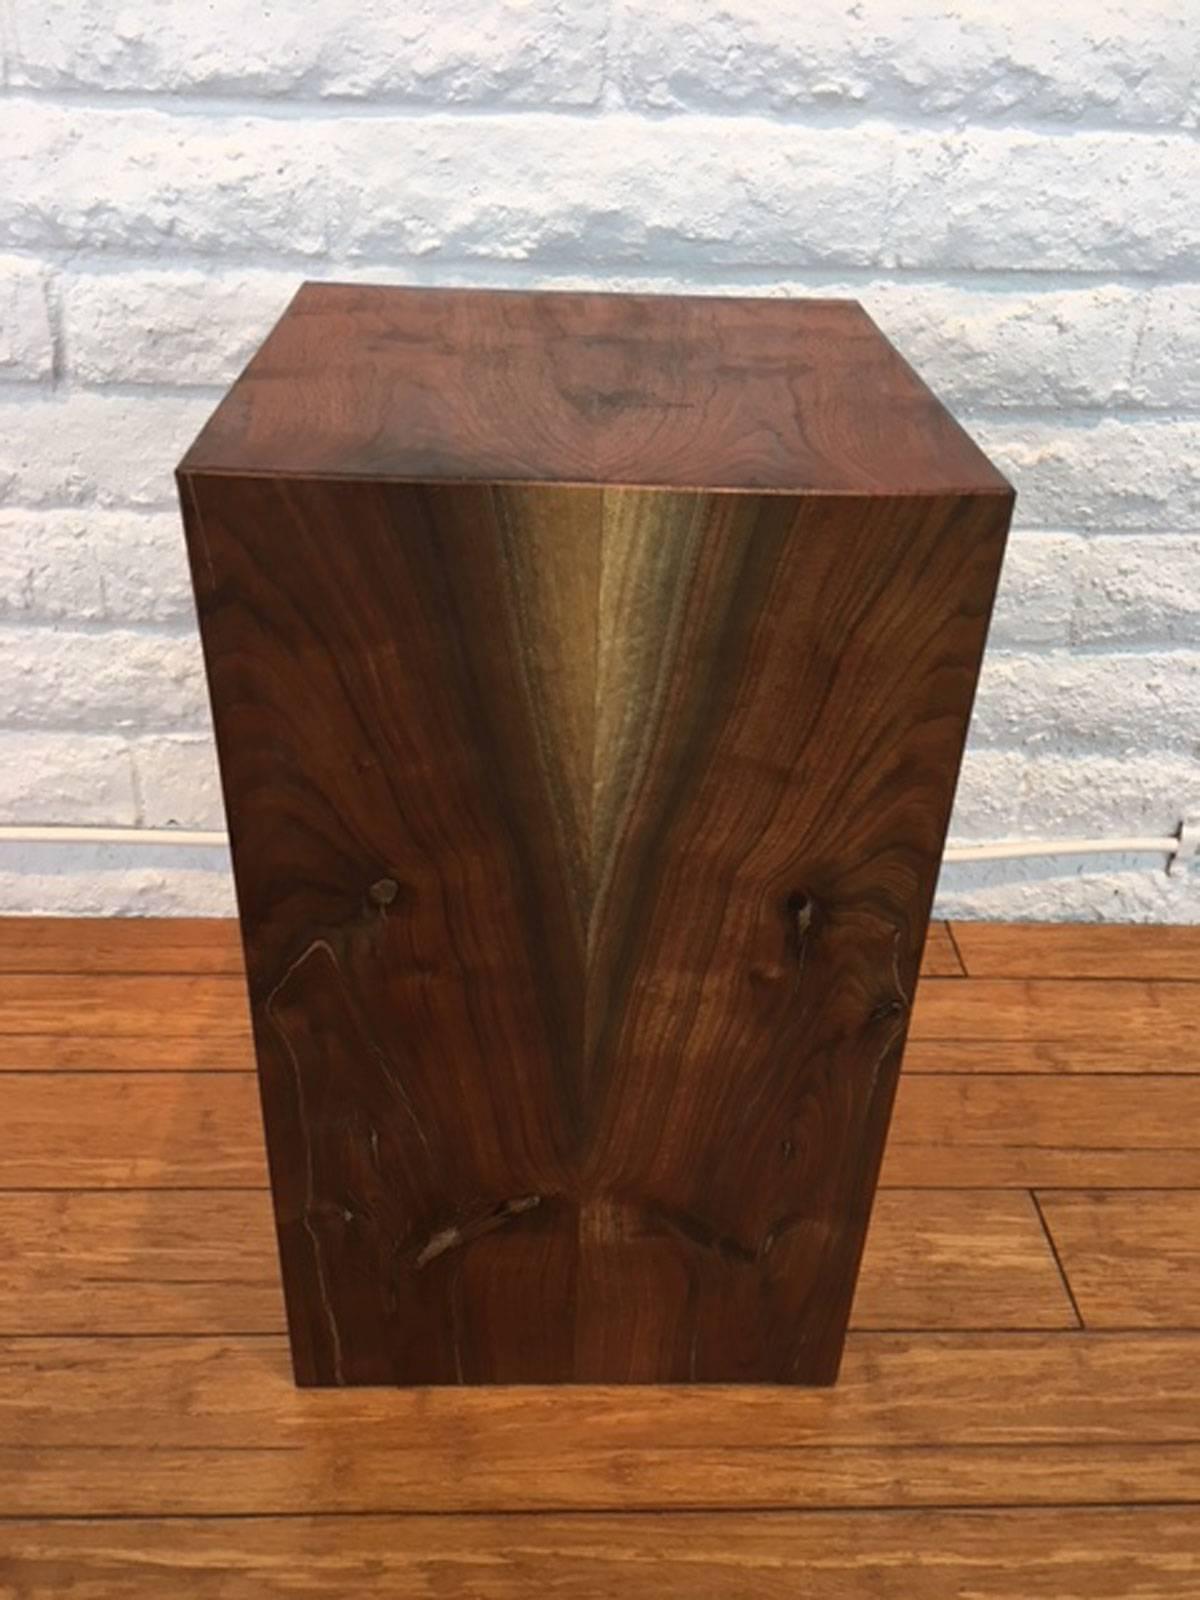 Walnut pedestal or side table produced and made by master wood artist and designer Scott Mills who only uses reclaimed (deadfall or storm downed trees) in the pieces he designs and produces. This piece is hollow. Appropriate for home or commercial